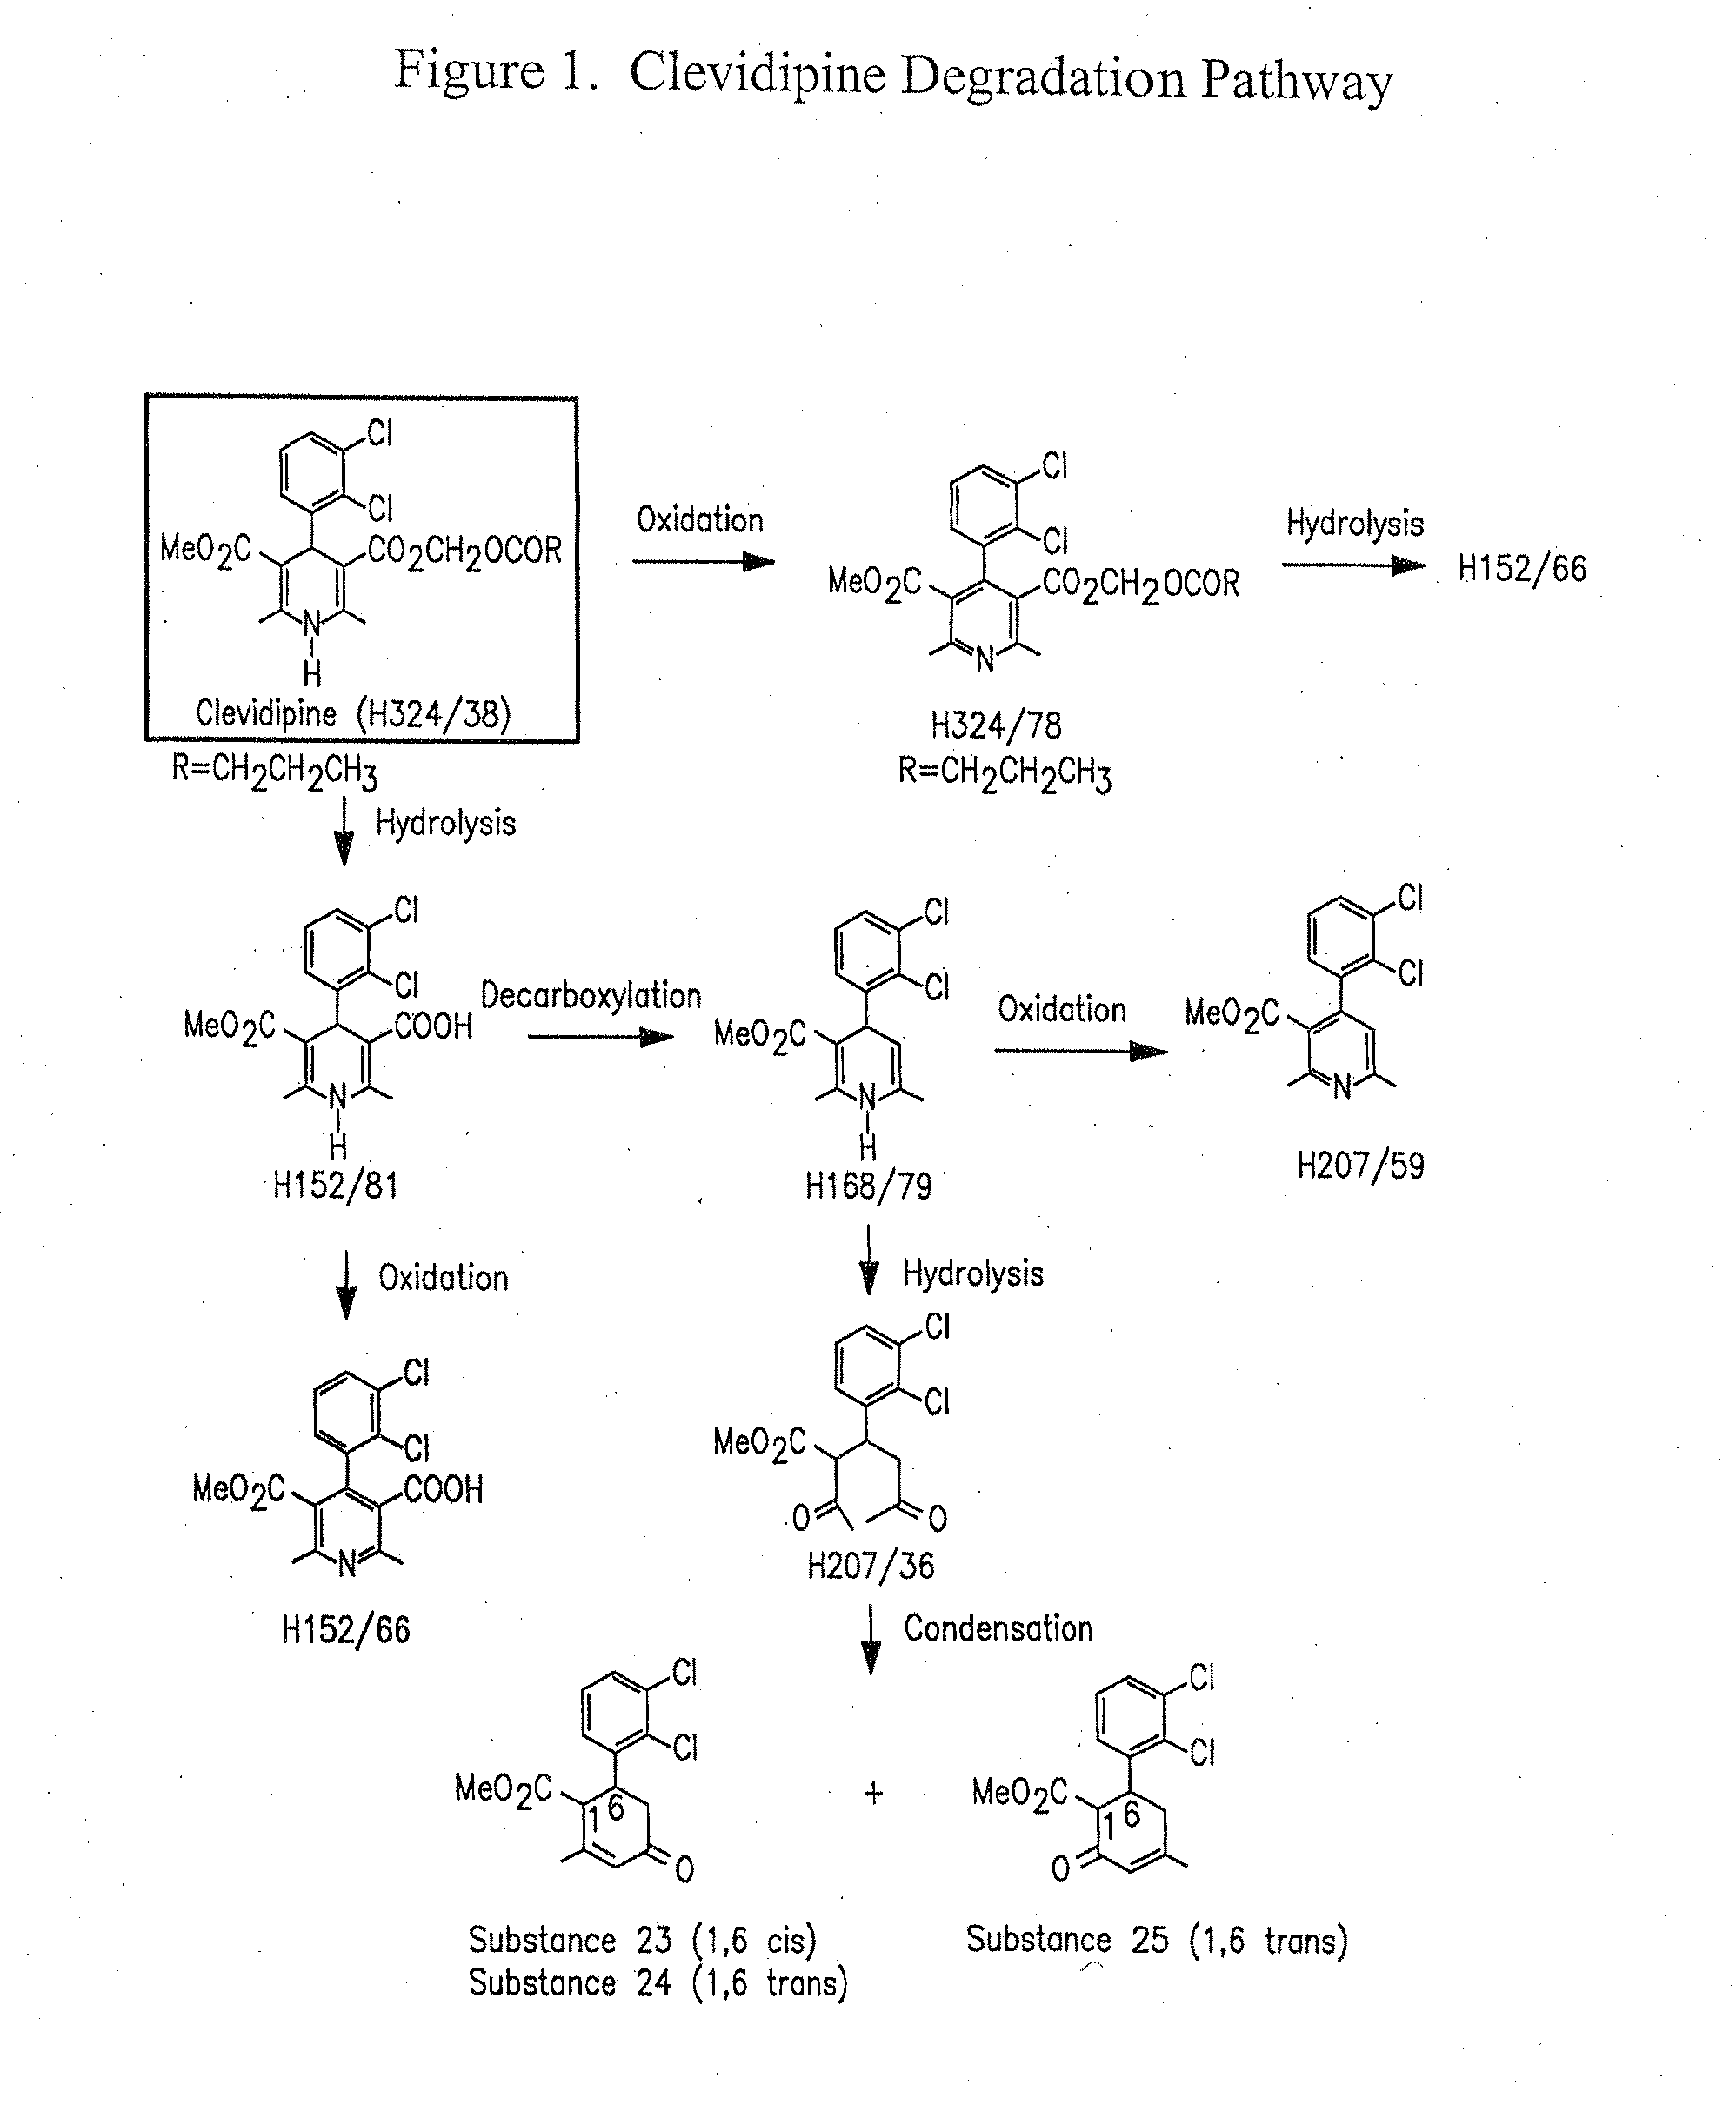 Clevidipine emulsion formulations containing antimicrobial agents